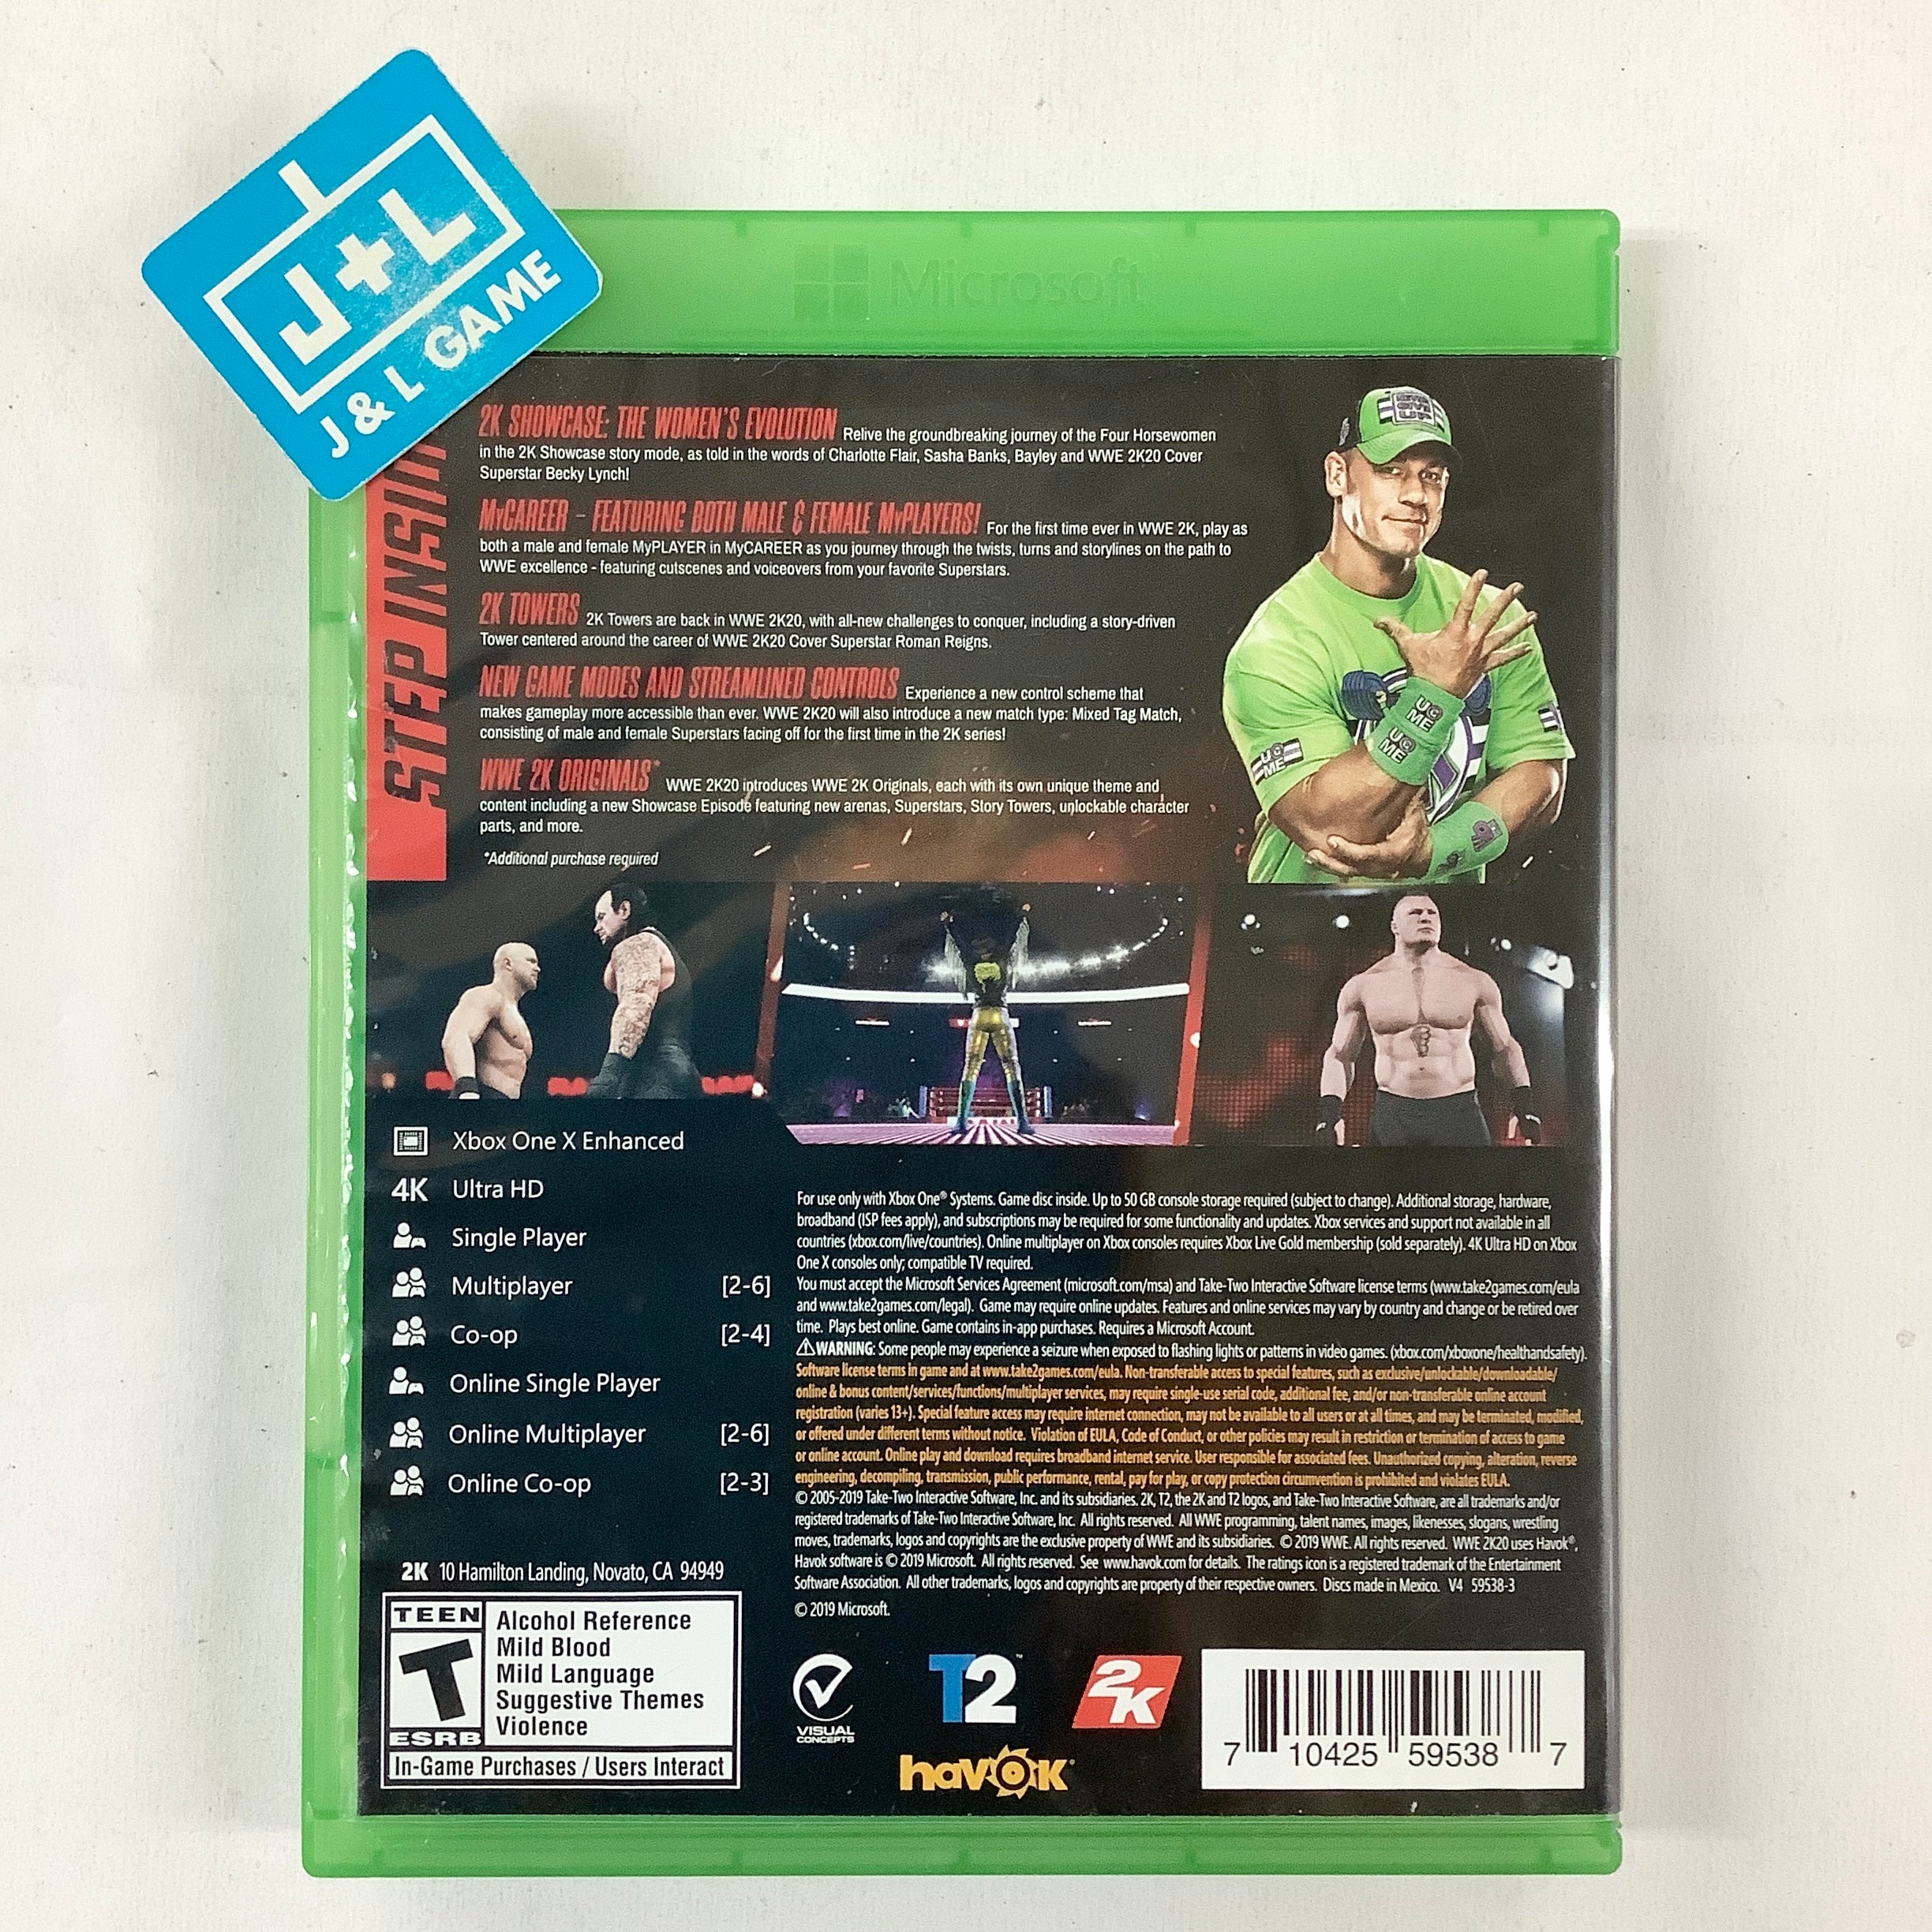 WWE 2K20 - (XB1) Xbox One [Pre-Owned] Video Games 2K Games   